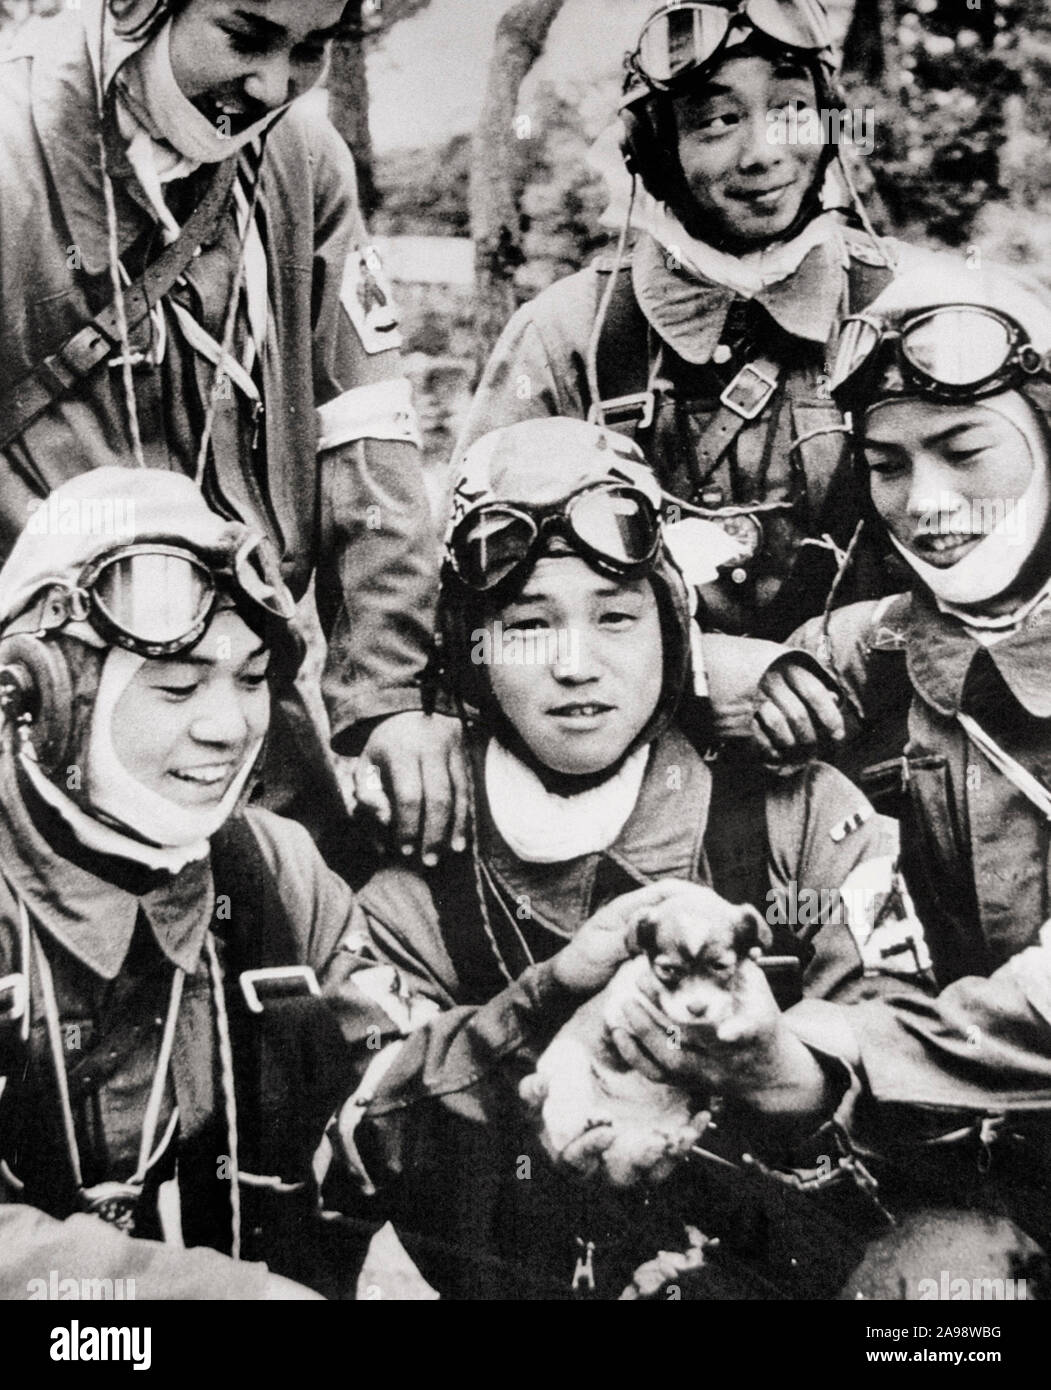 Members of 72nd Shinbu Squadron. Three of the five are 17 years old and the other two are 18 and 19 years old. The photo was taken the day before their mission. Left to right: front row Tsutomu Hayakawa, Yukio Araki, Takamasa Senda back row Kaname Takahashi, Mitsuyoshi Takahashi. Each of these young men were corporals. At 17, Yukio Araki is the youngest known Kamikaze pilot to die in the war. May 26, 1945 Stock Photo